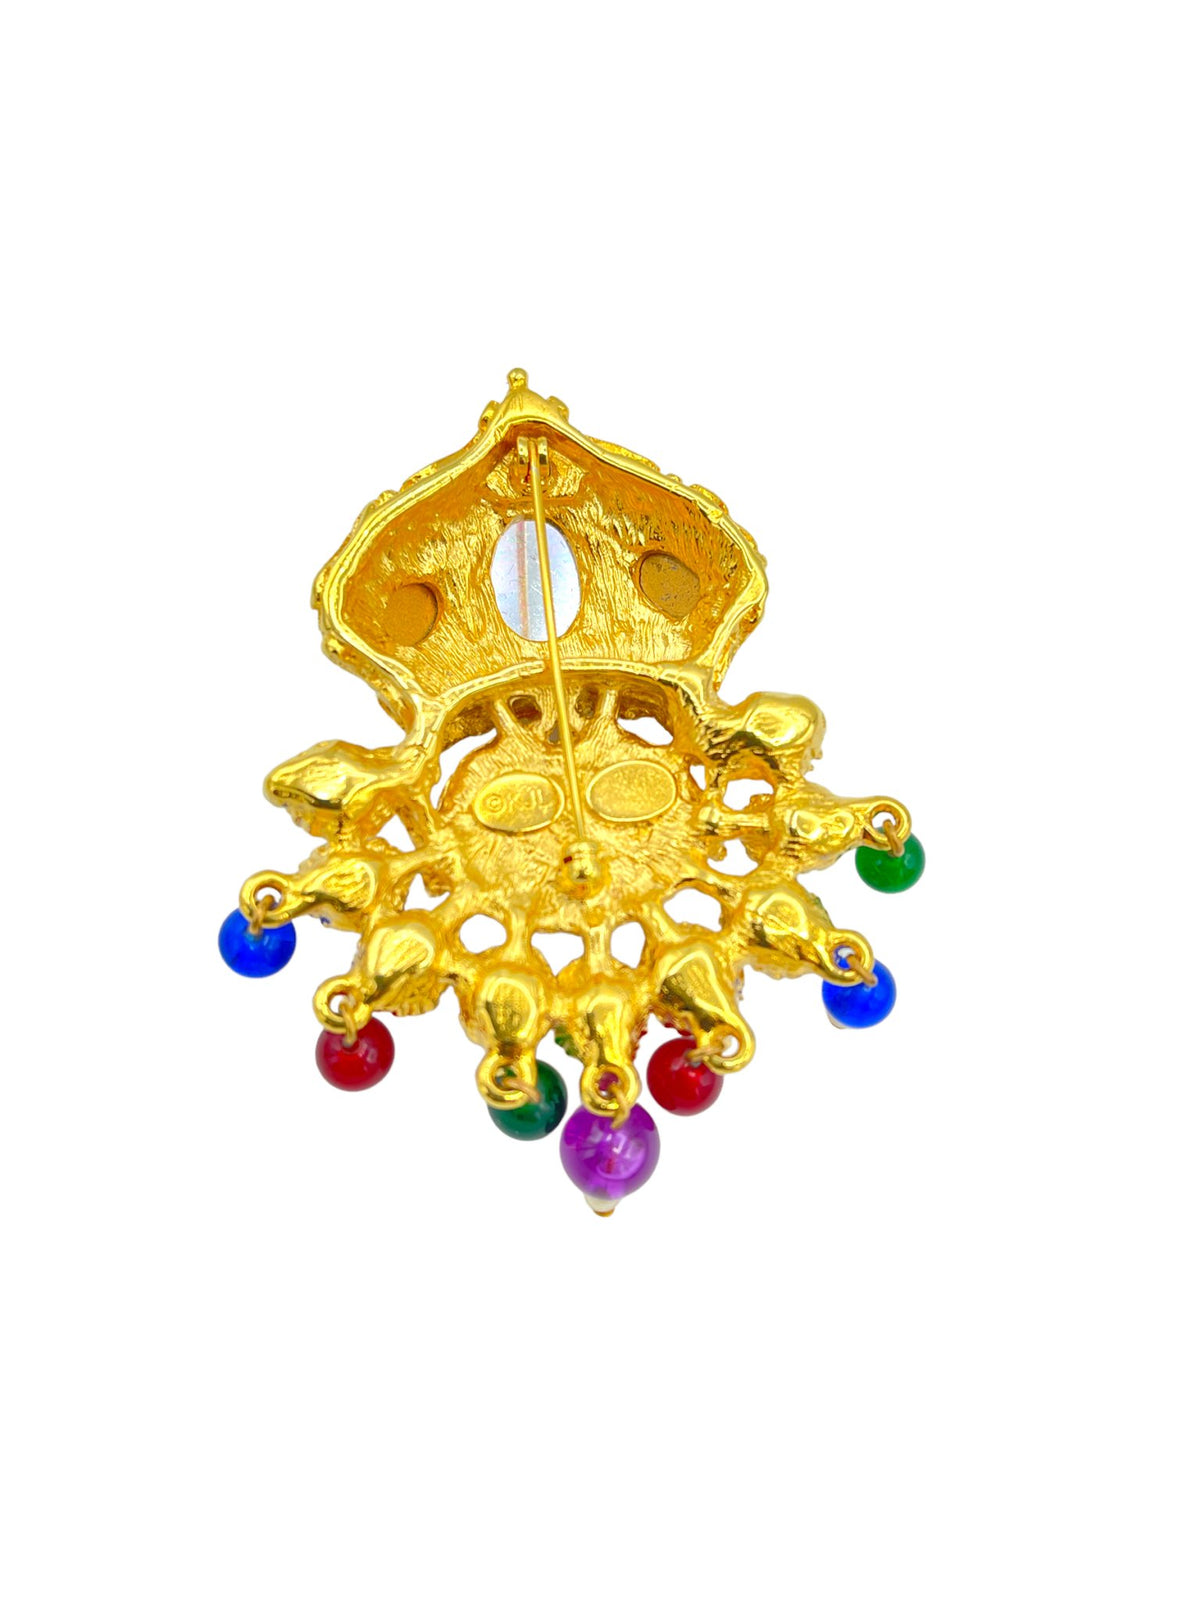 Kenneth Jay Lane KJL Gold Mogul India Jewel Colors Crown Brooch - 24 Wishes Vintage Jewelry